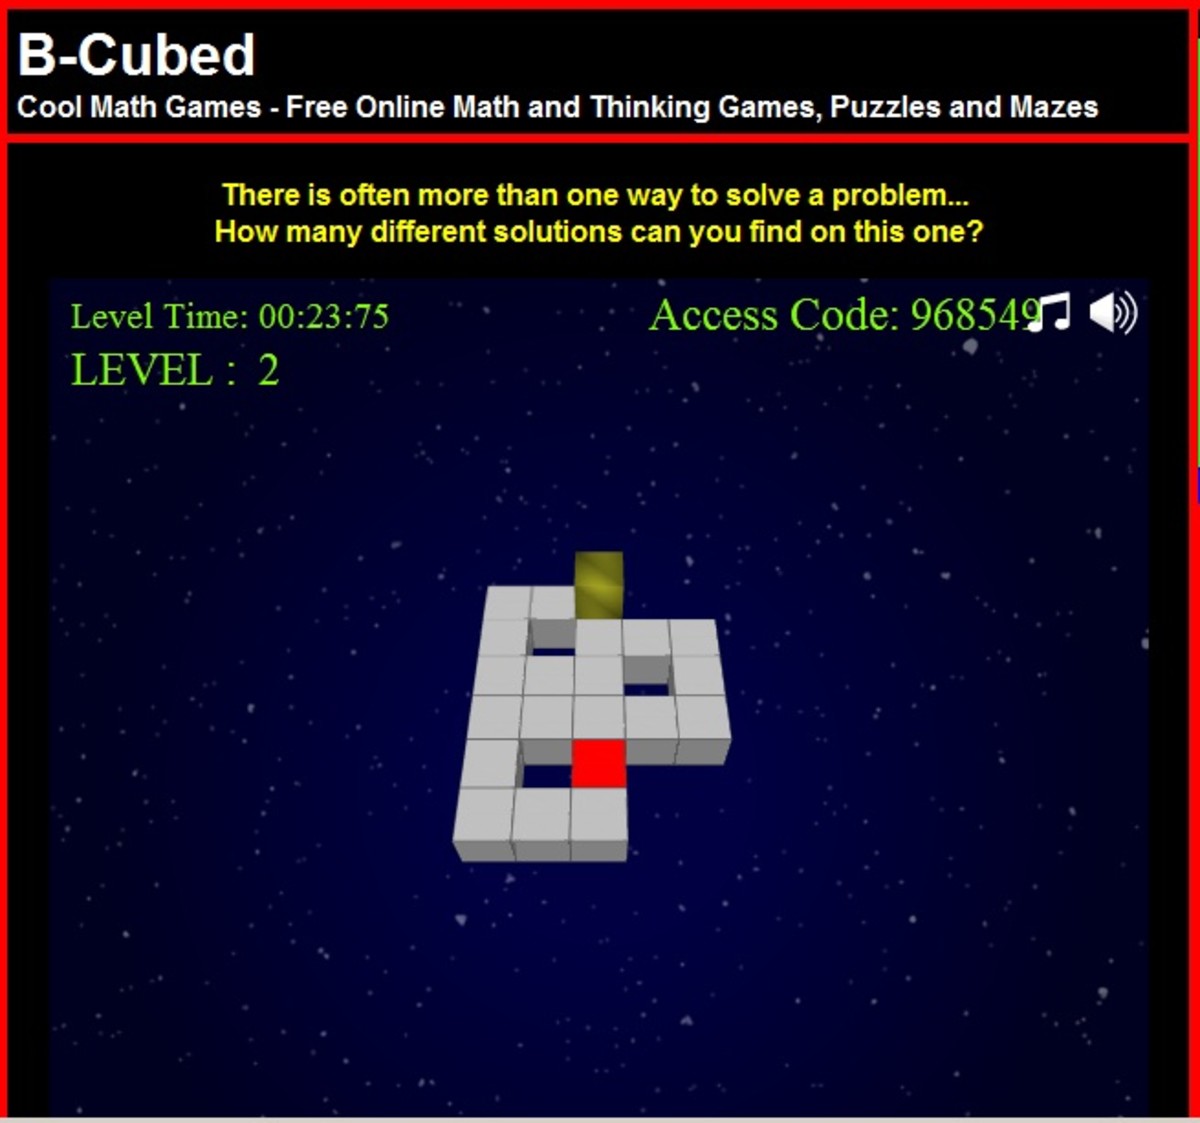 Cool Math Games Site Review | HubPages